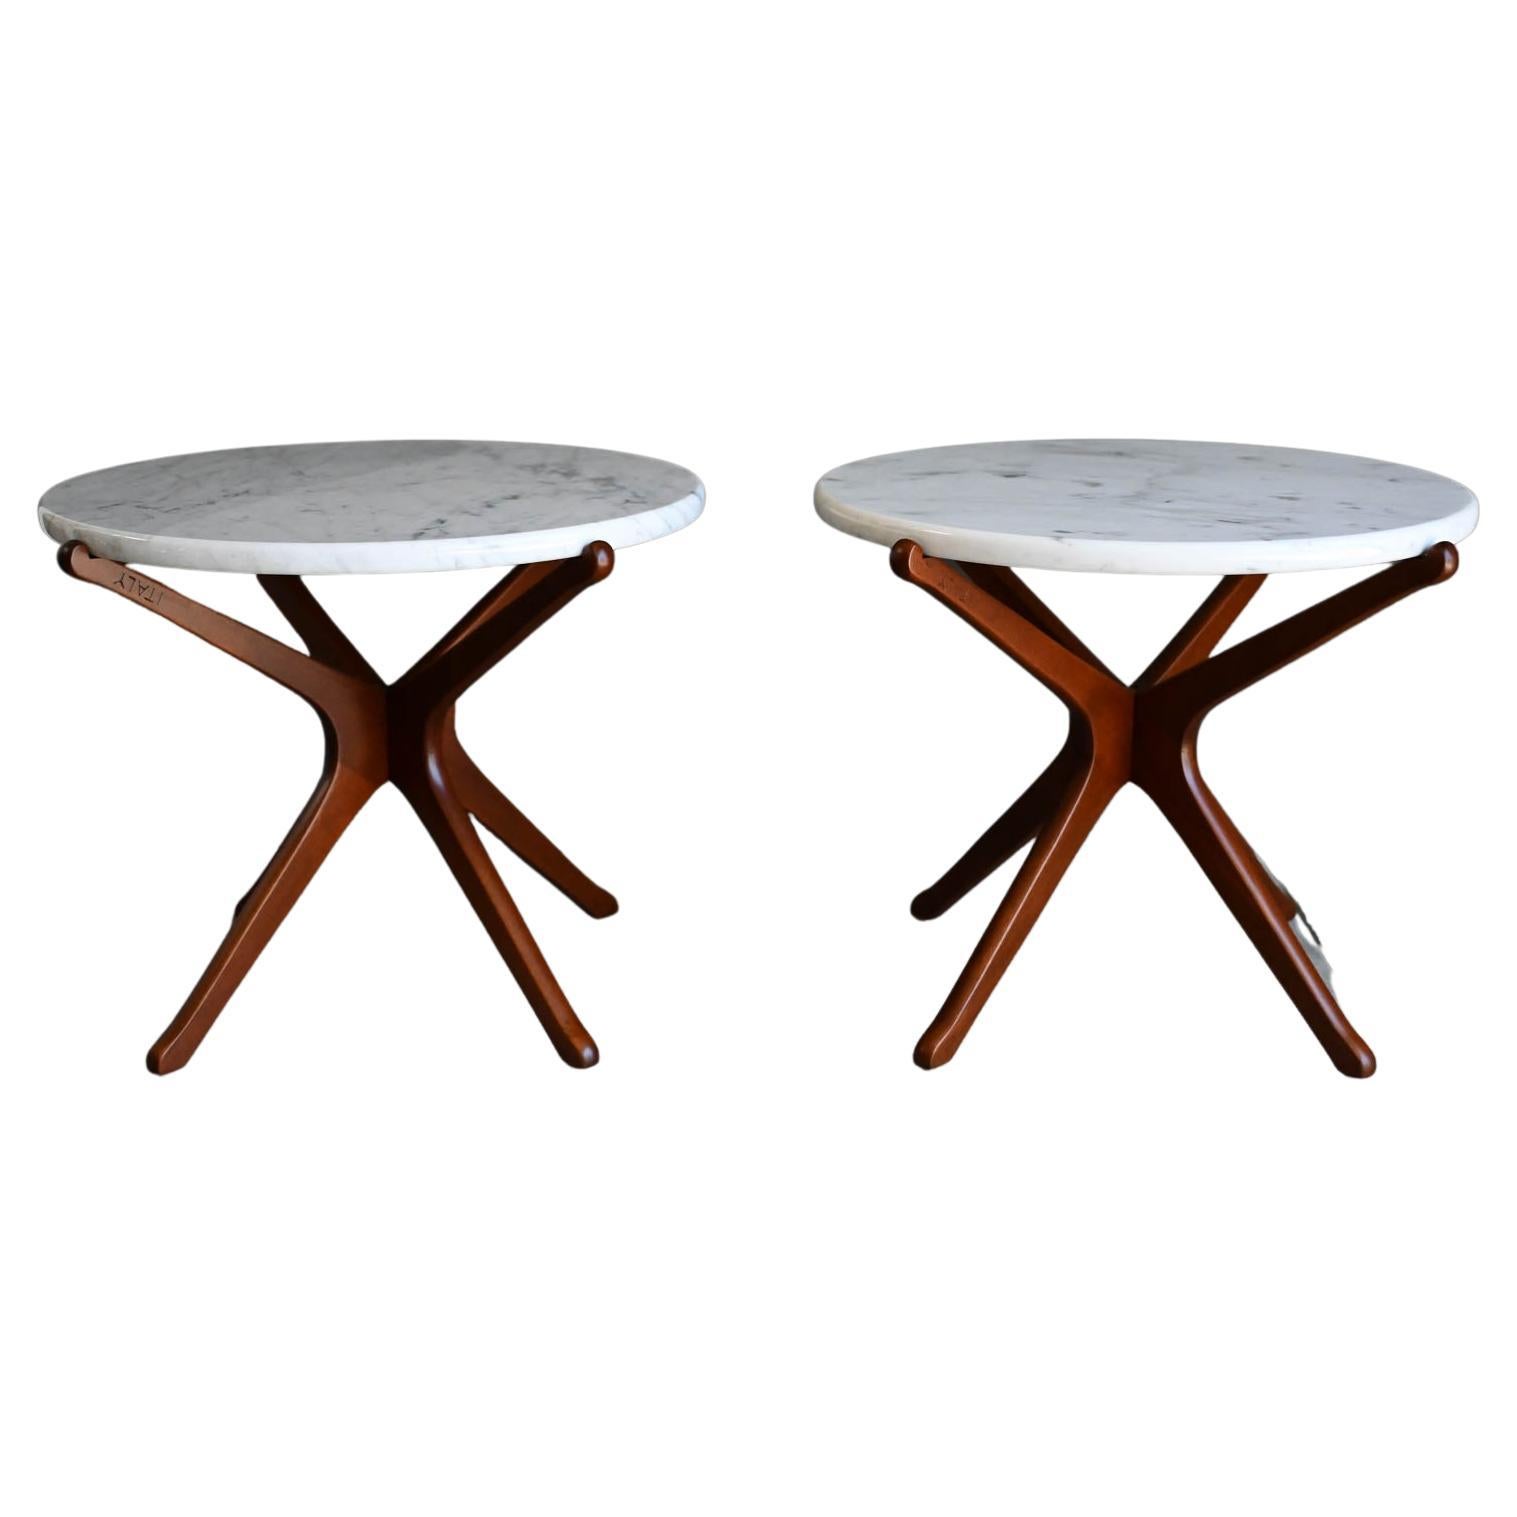 Pair of Ico Parisi Italian Walnut and Marble Side Tables, ca. 1960